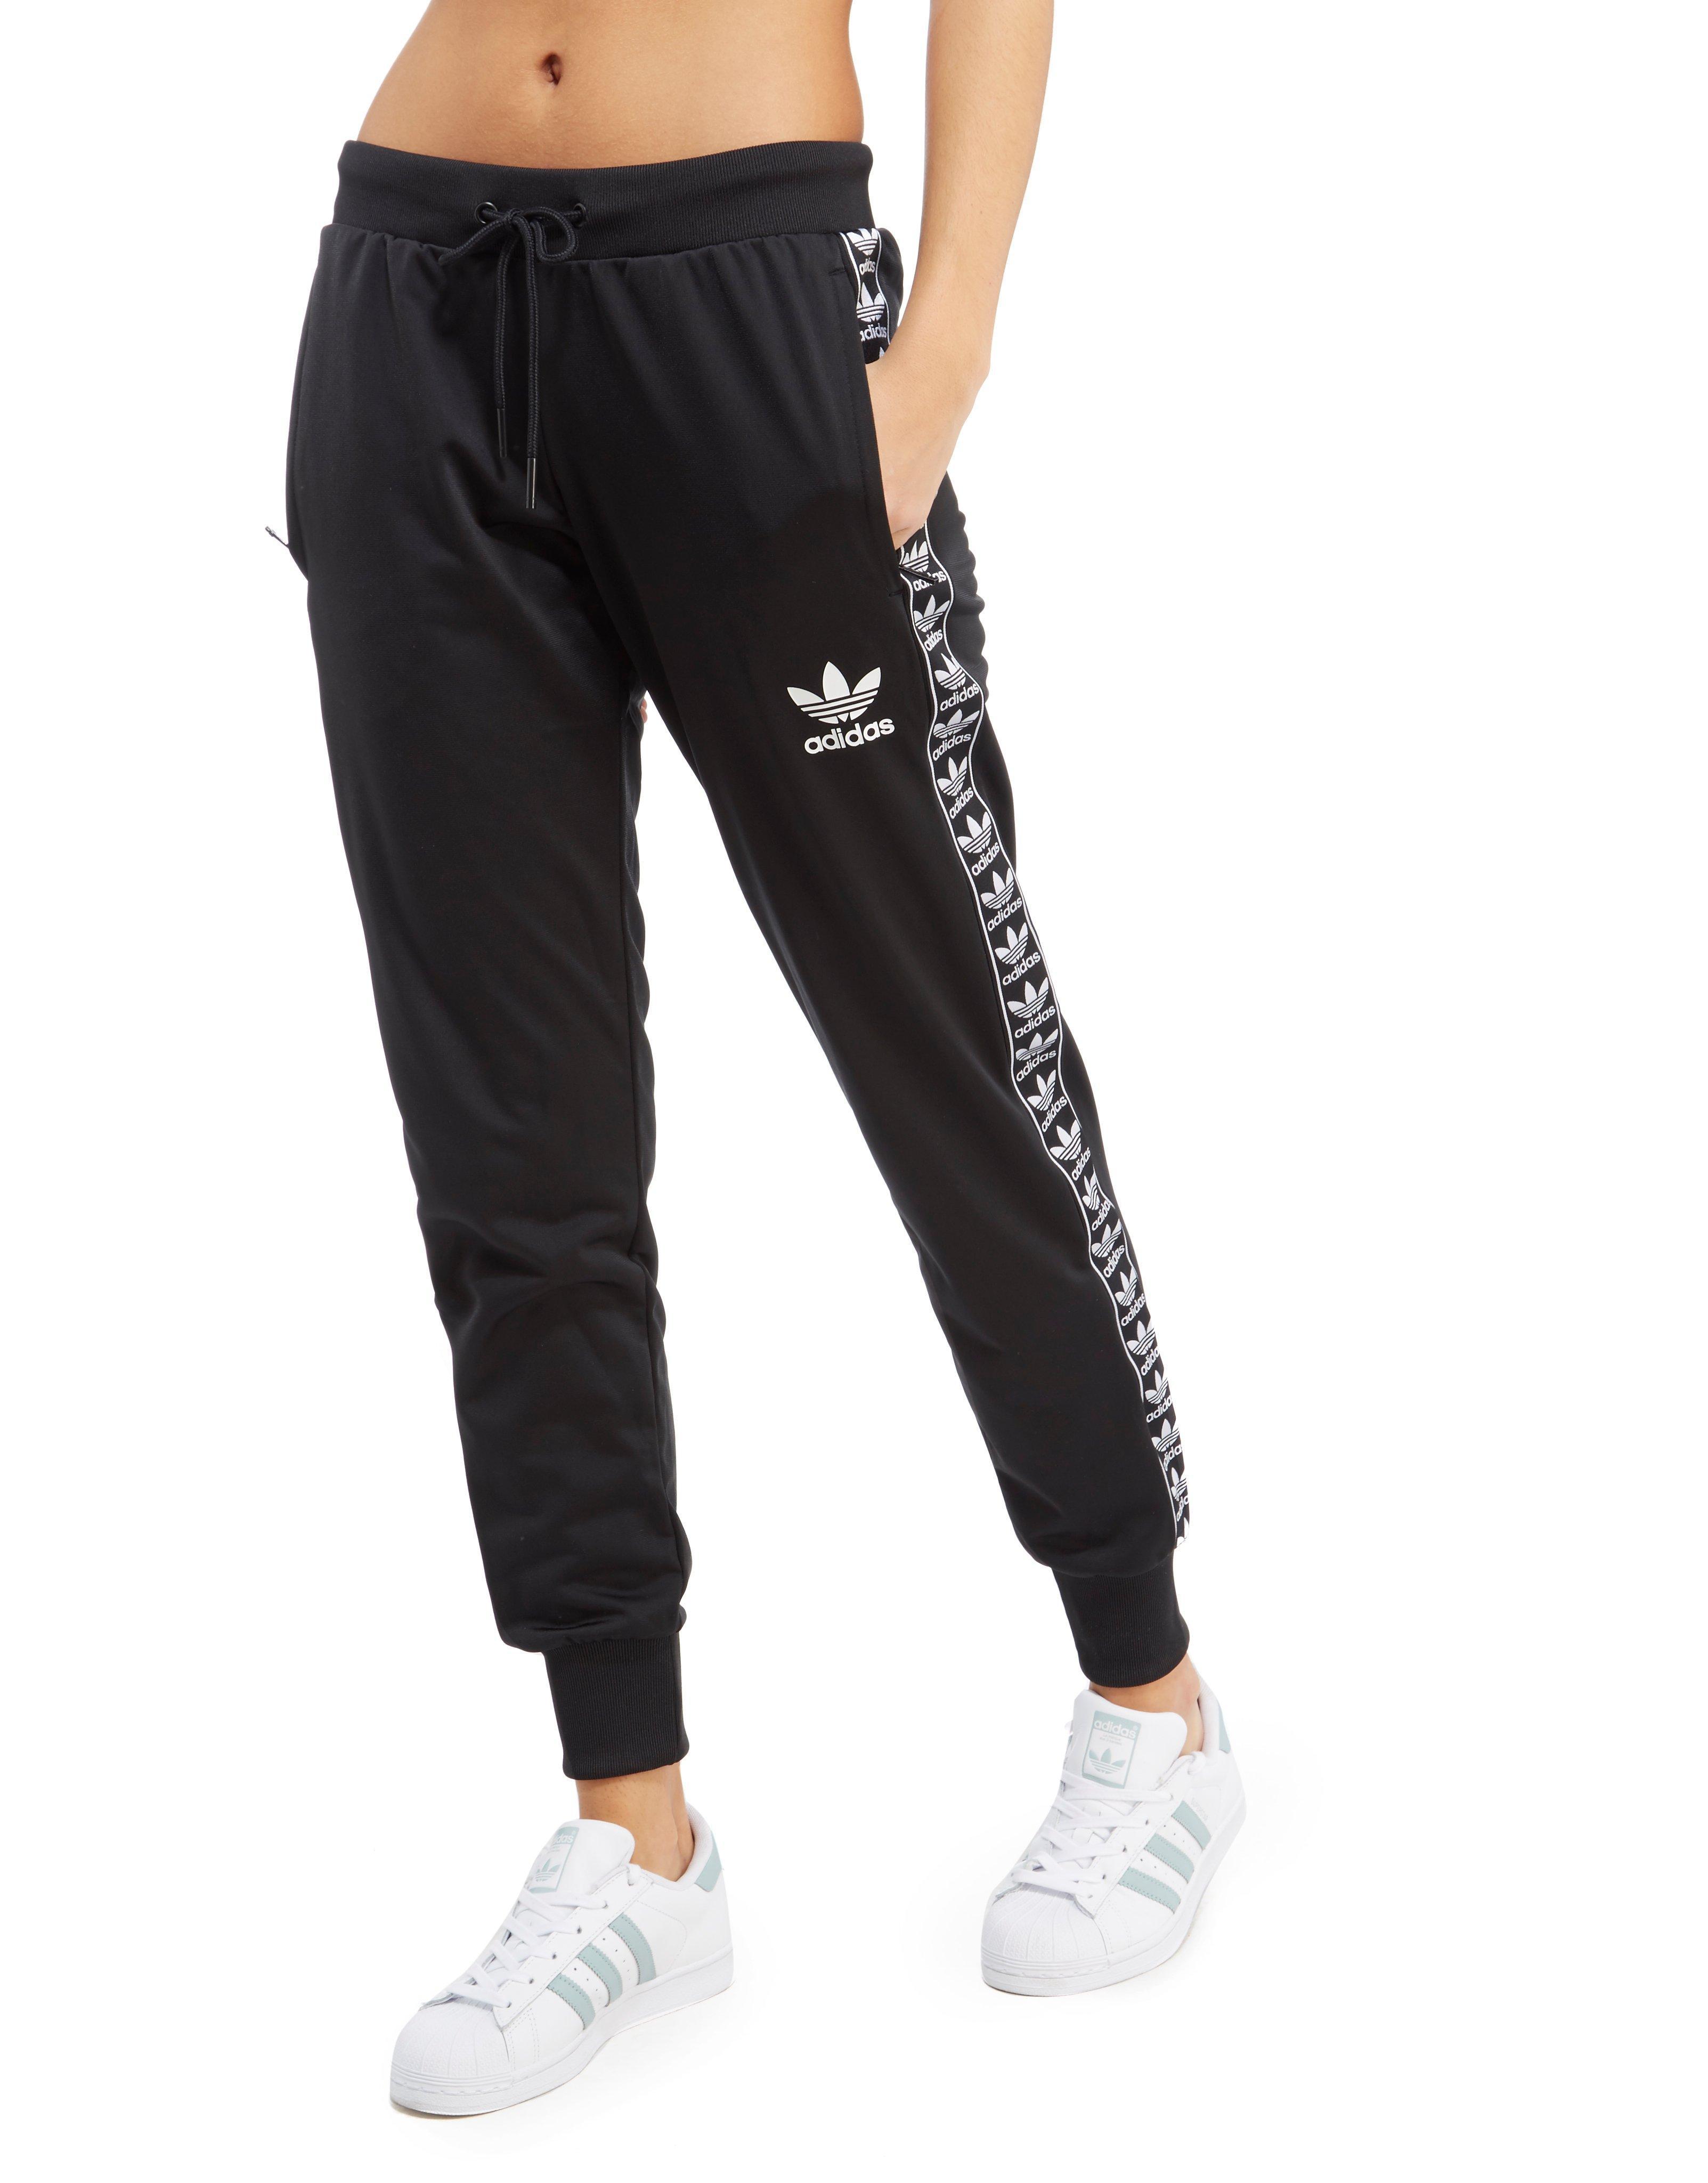 adidas Originals Synthetic Firebird Tape Track Pants in Black - Lyst3206 x 4097